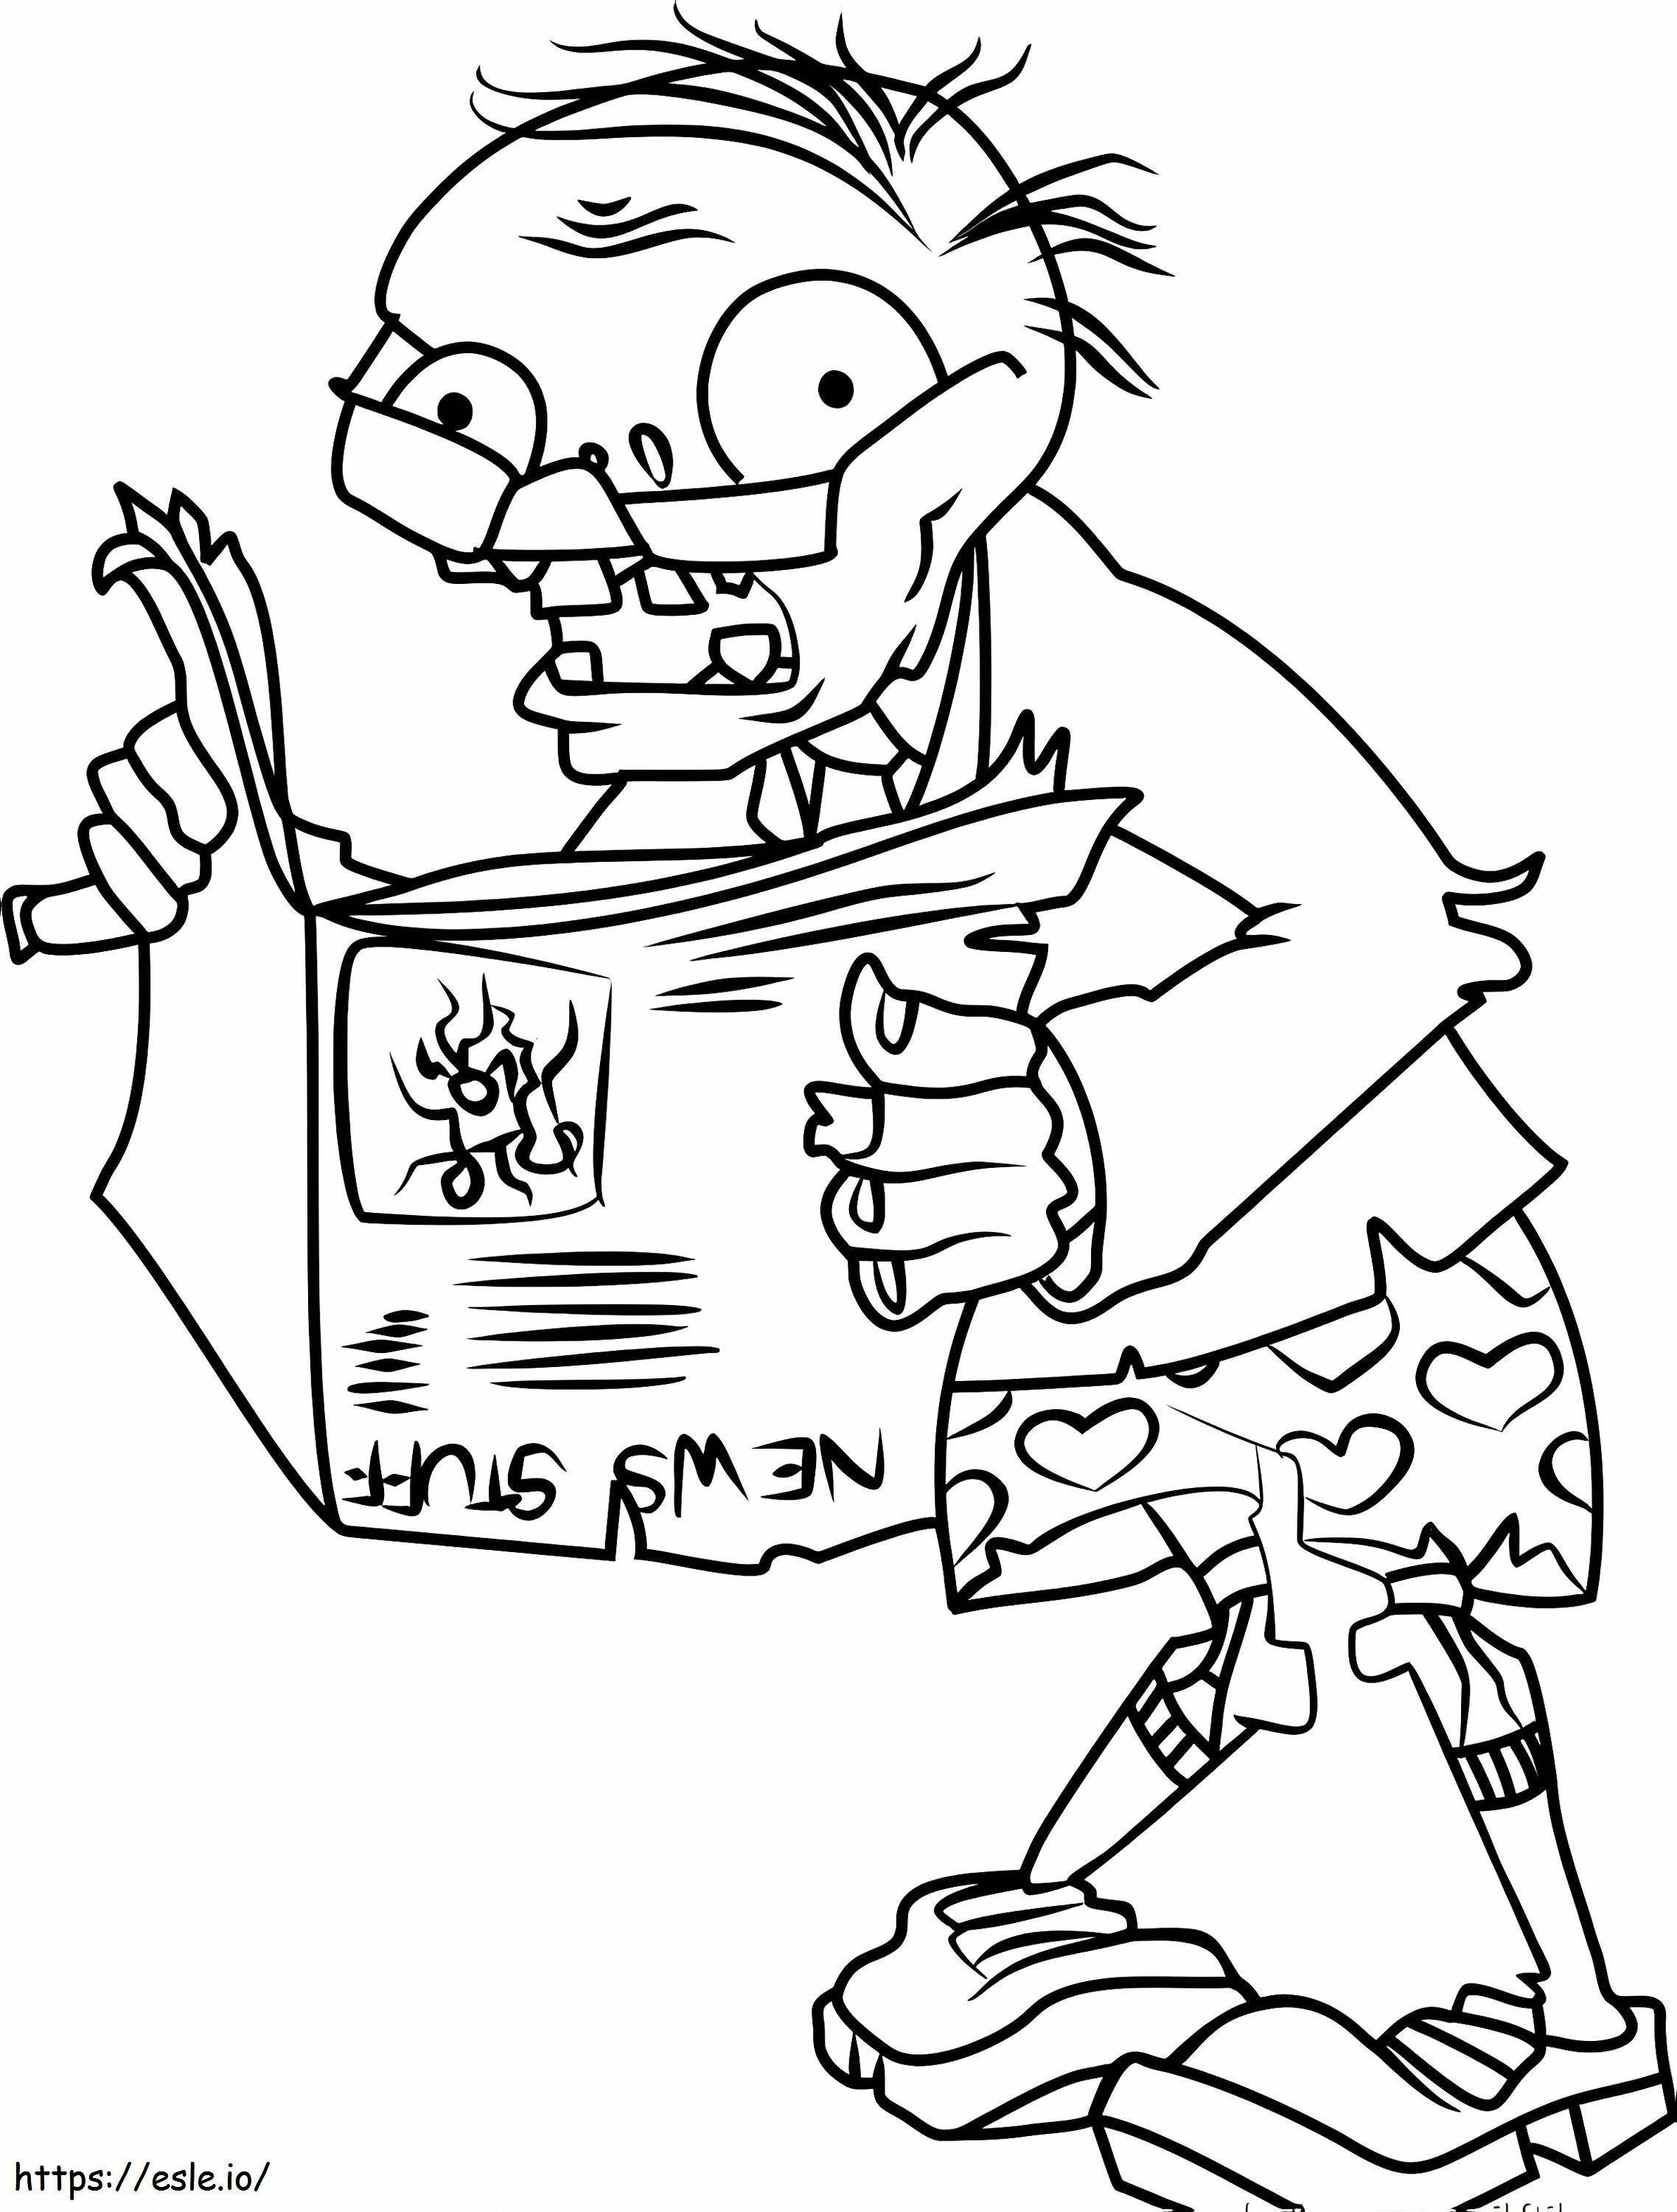 Zombie Reads The Newspaper coloring page